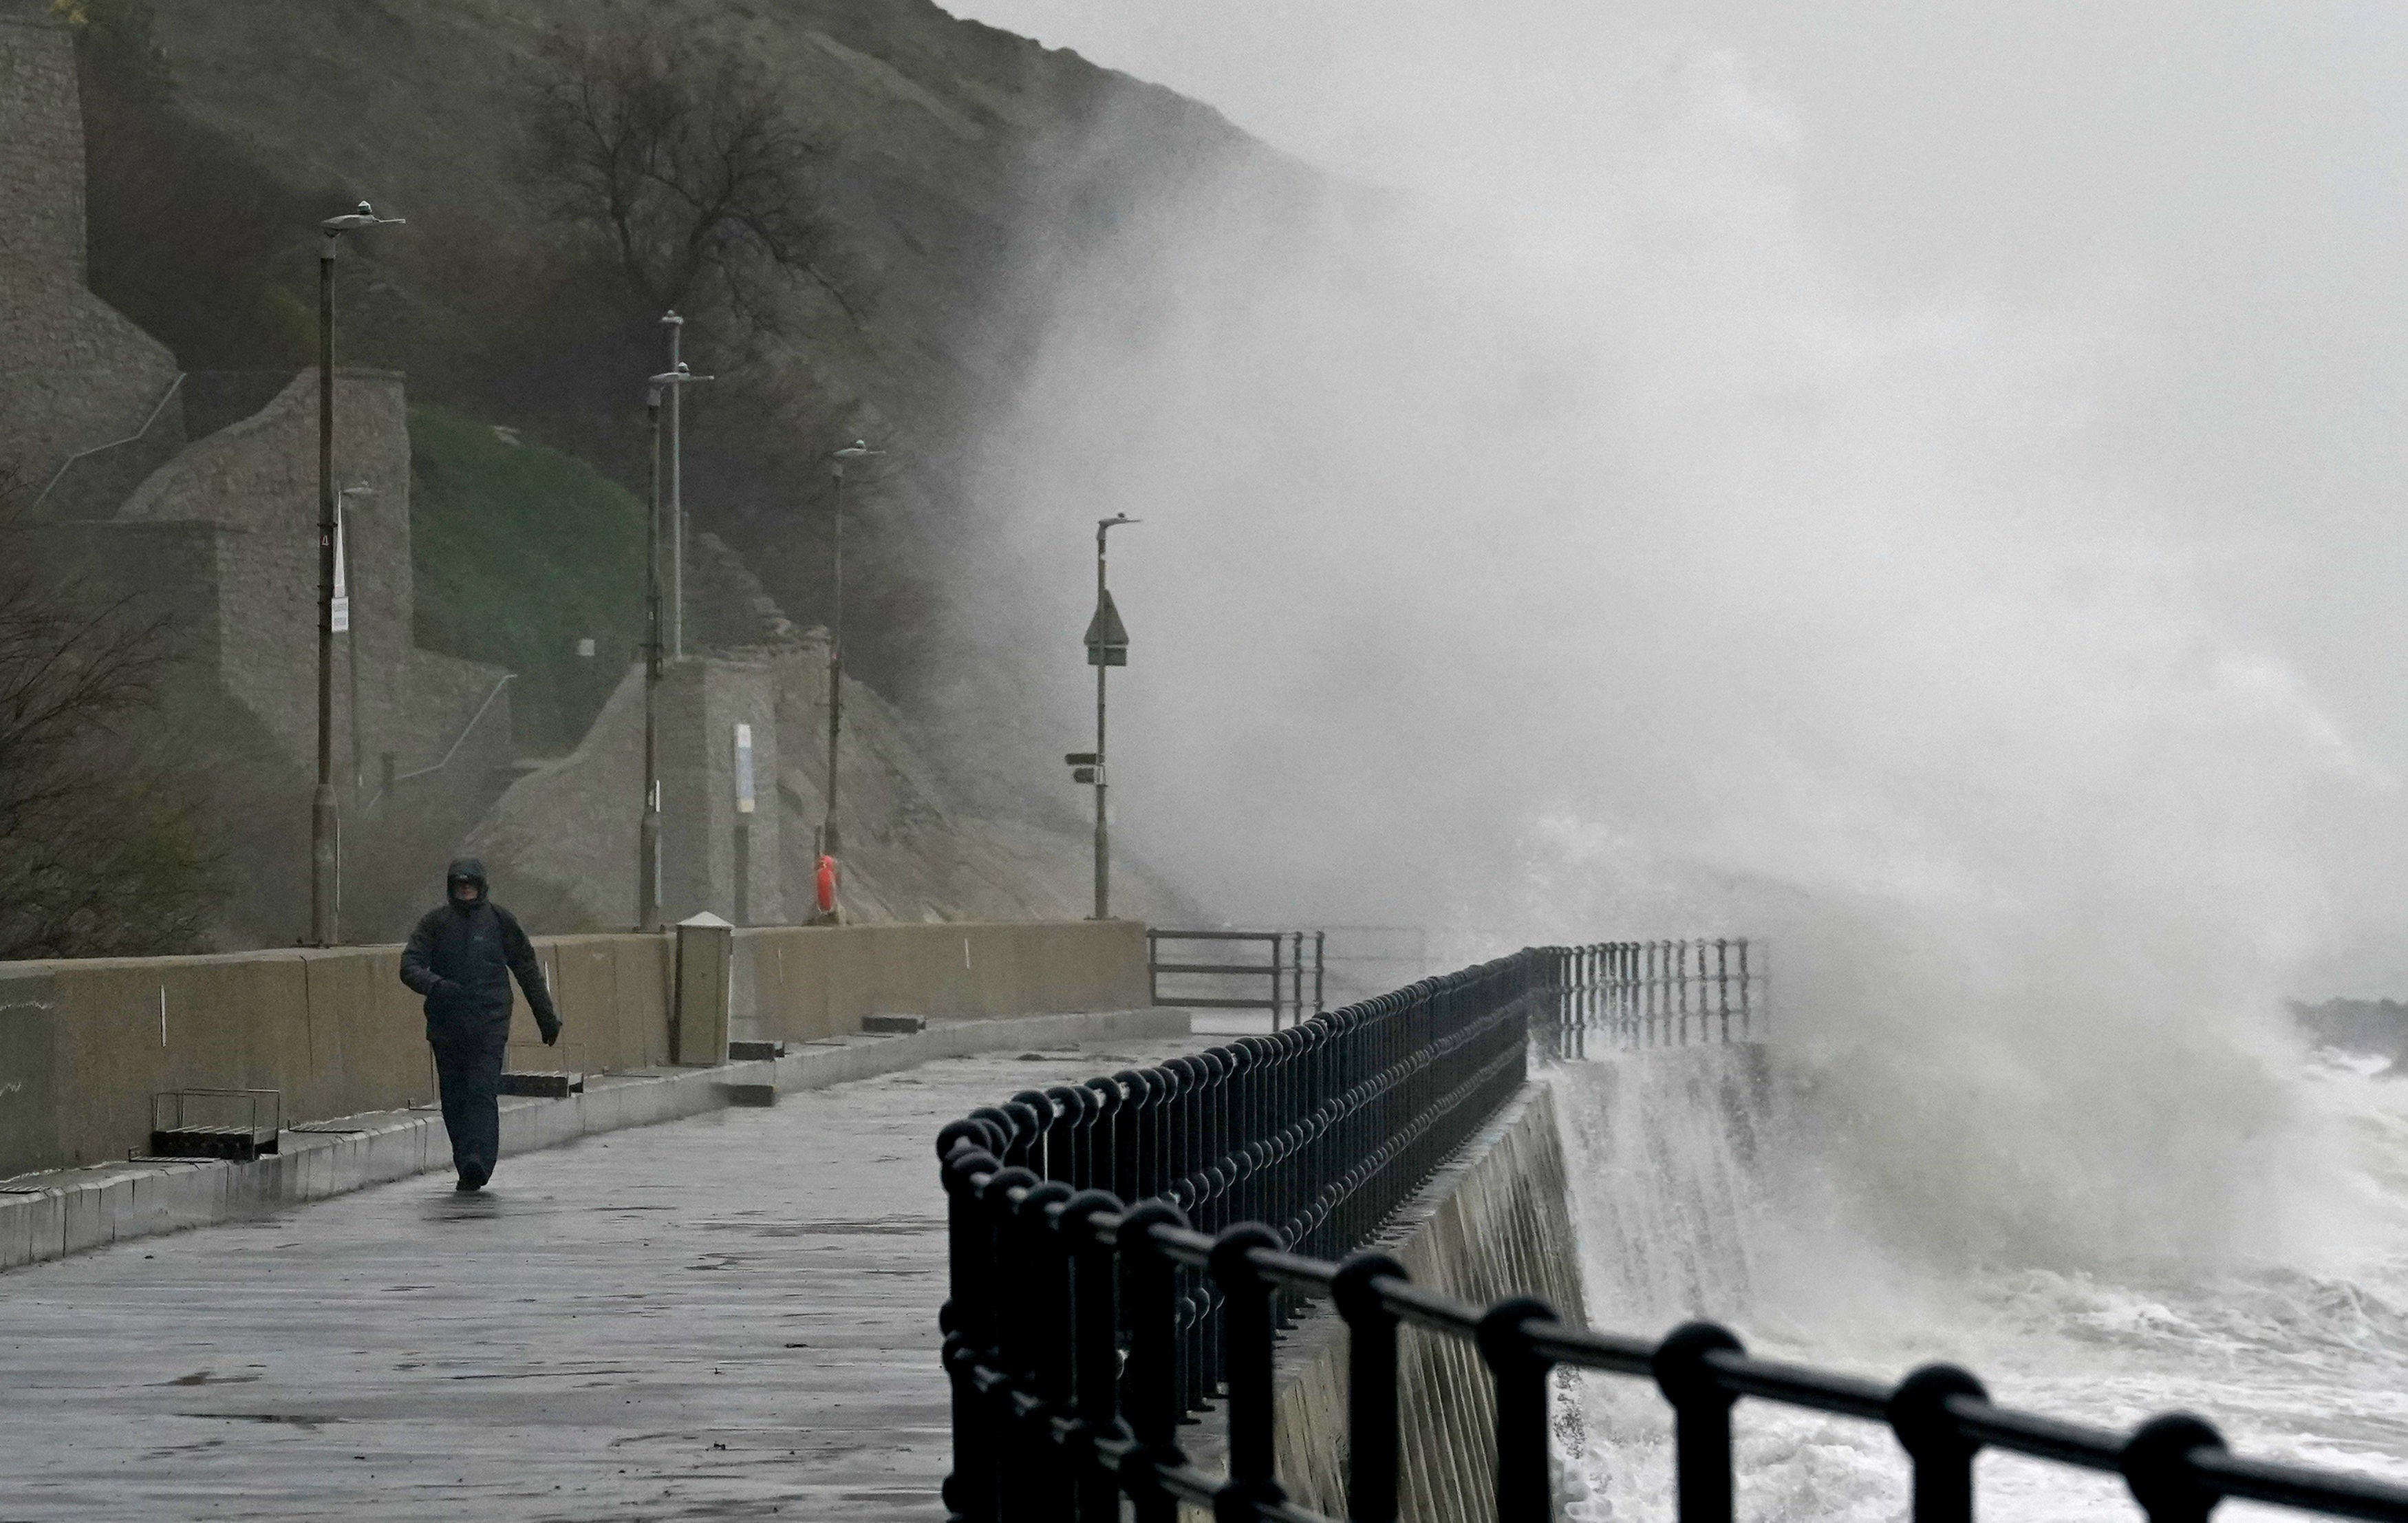 Forecasters have warned of dangerous conditions along the coast in the South West